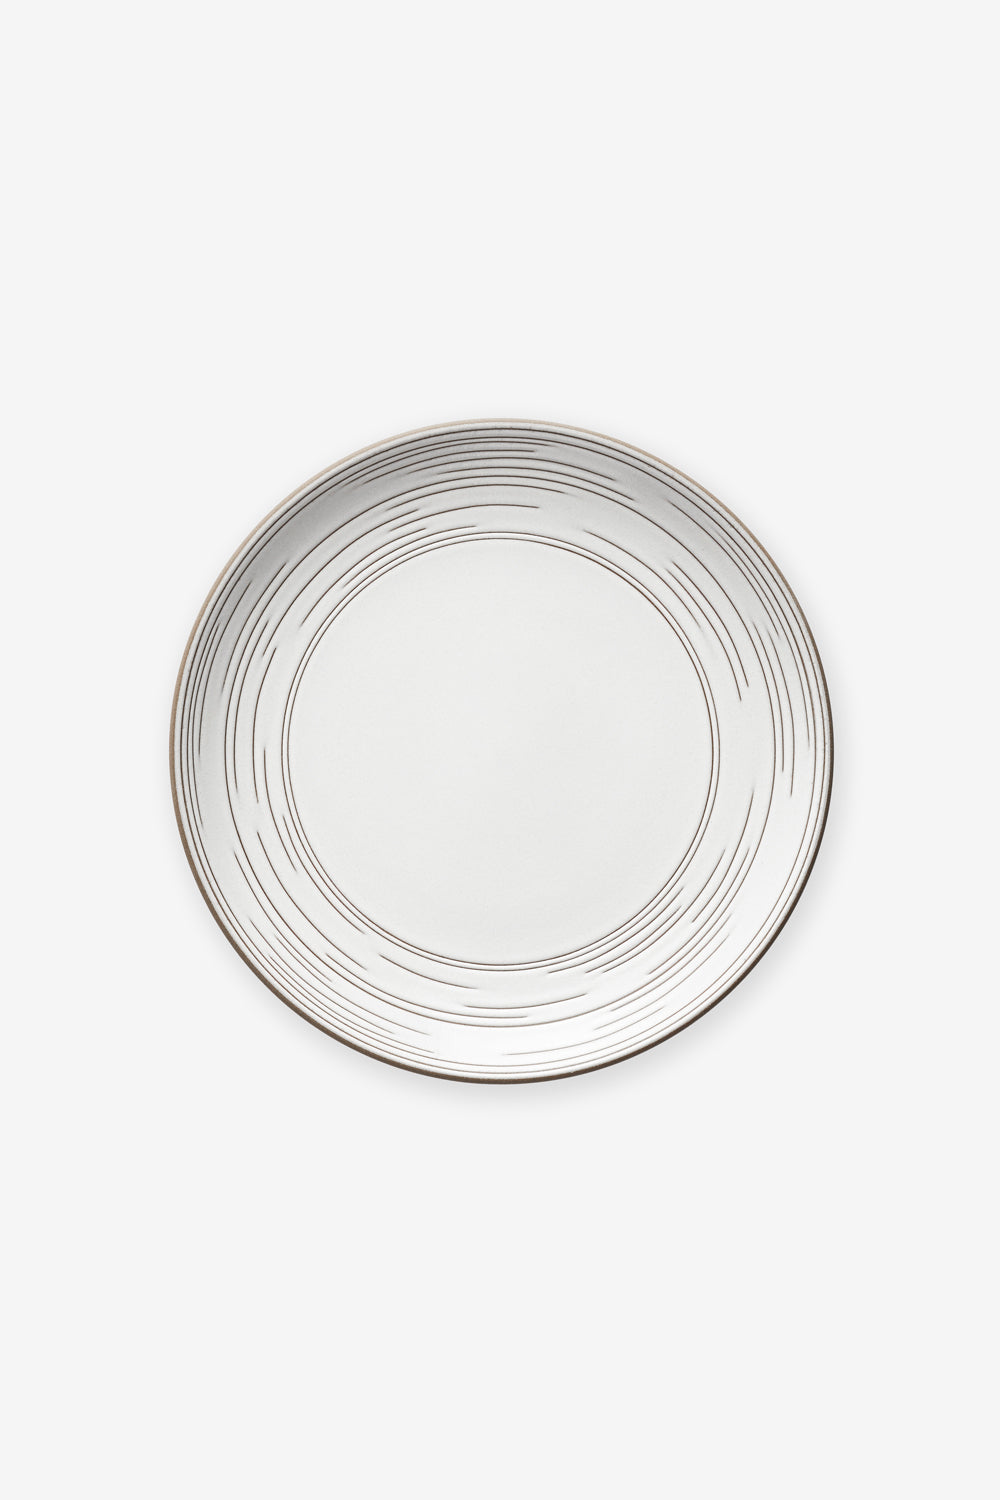 Echo Etched Salad Plate in Opaque White Hand Crafted from Alabama Chanin and Heath Ceramics Collaboration